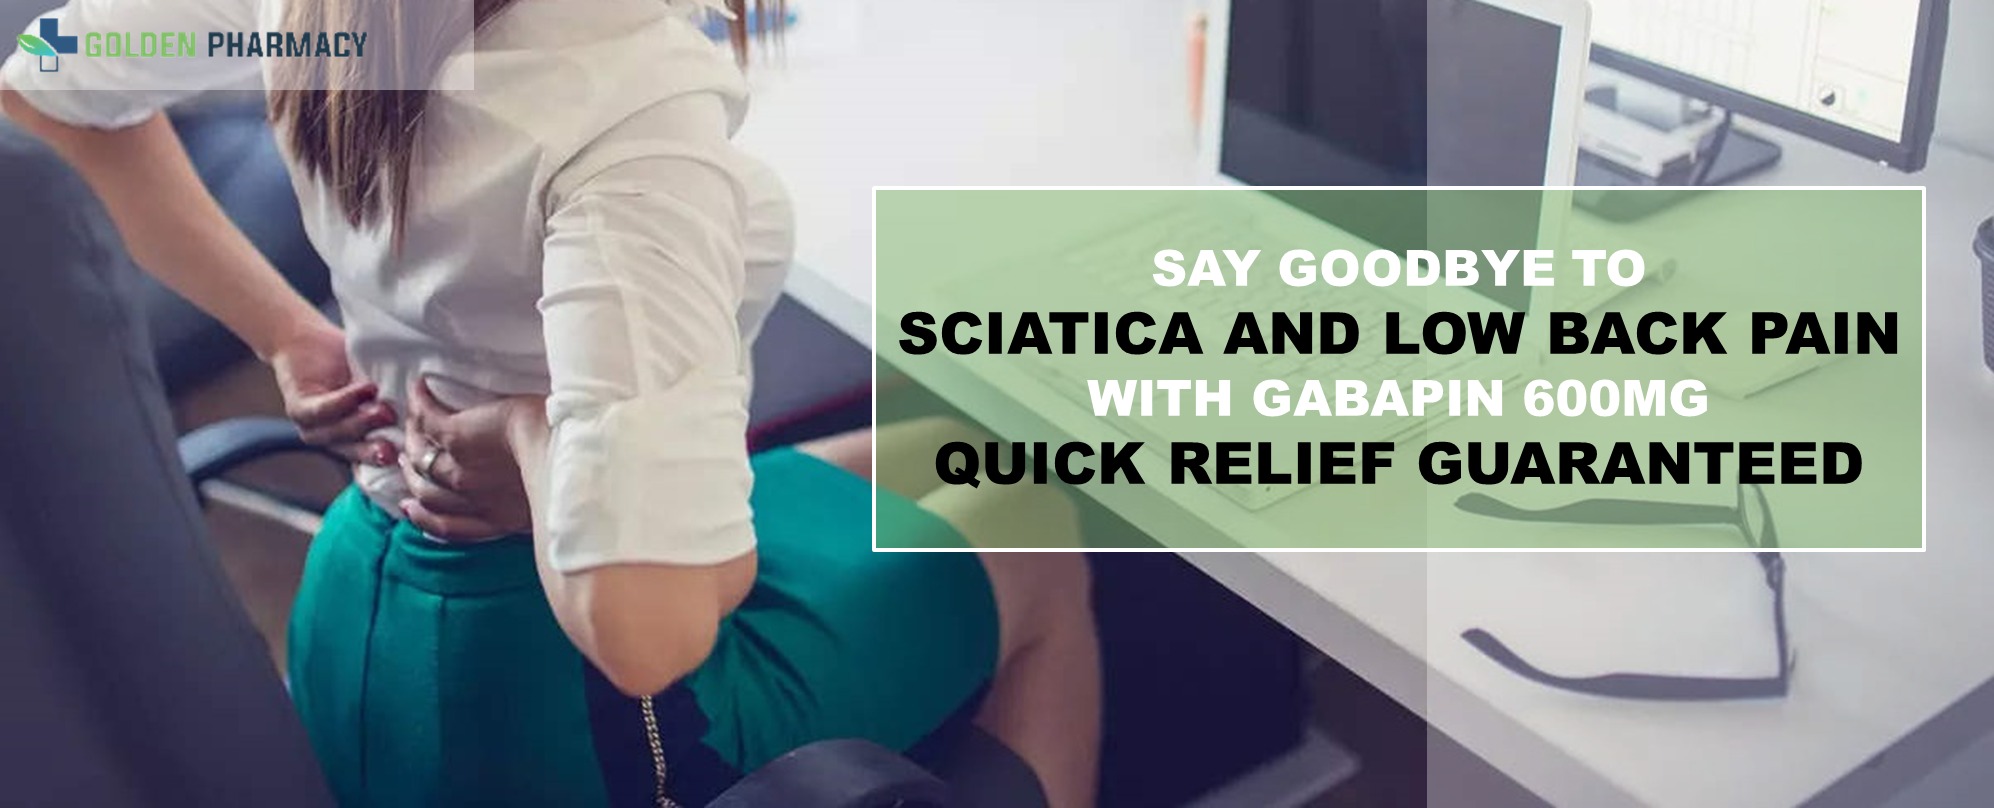 Say Goodbye to Sciatica and Low Back Pain with Gabapin 600mg – Quick Relief Guaranteed!